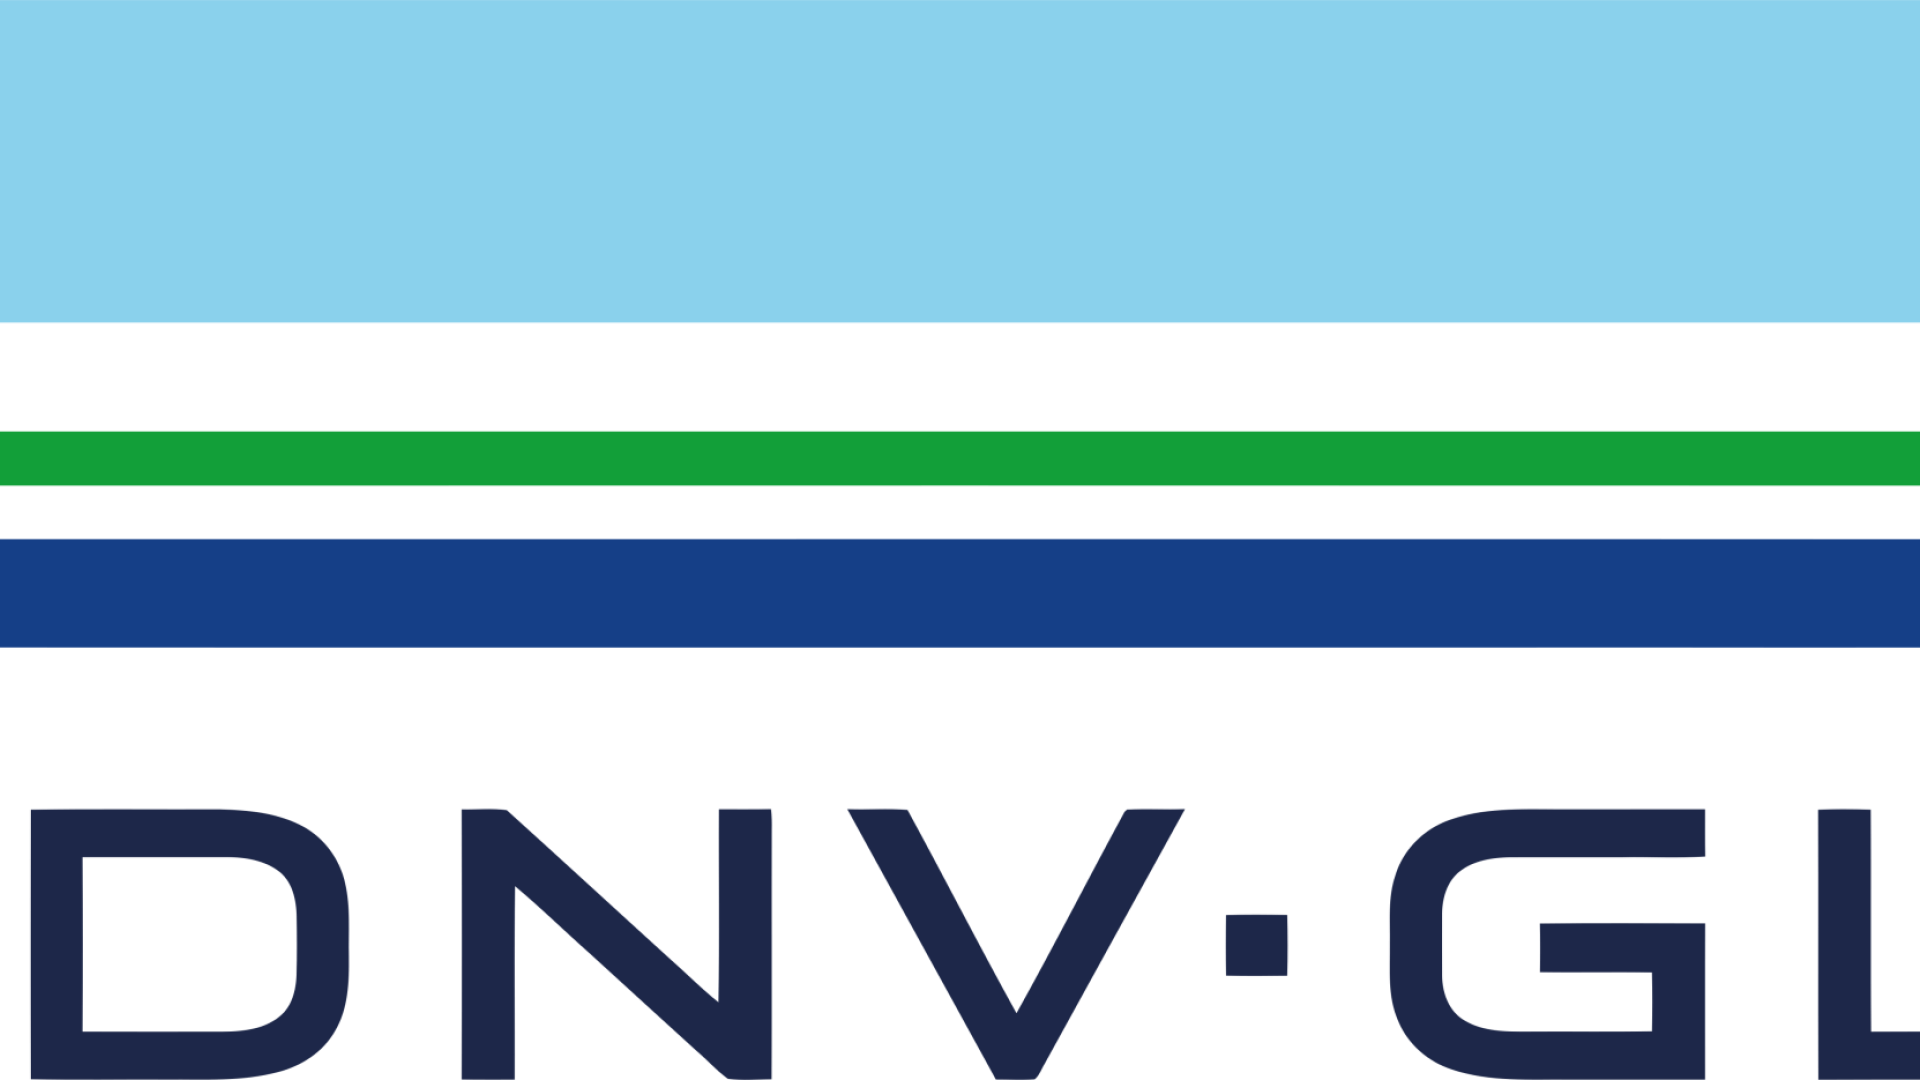 DNV Approval Of Service Suppliers Certificate